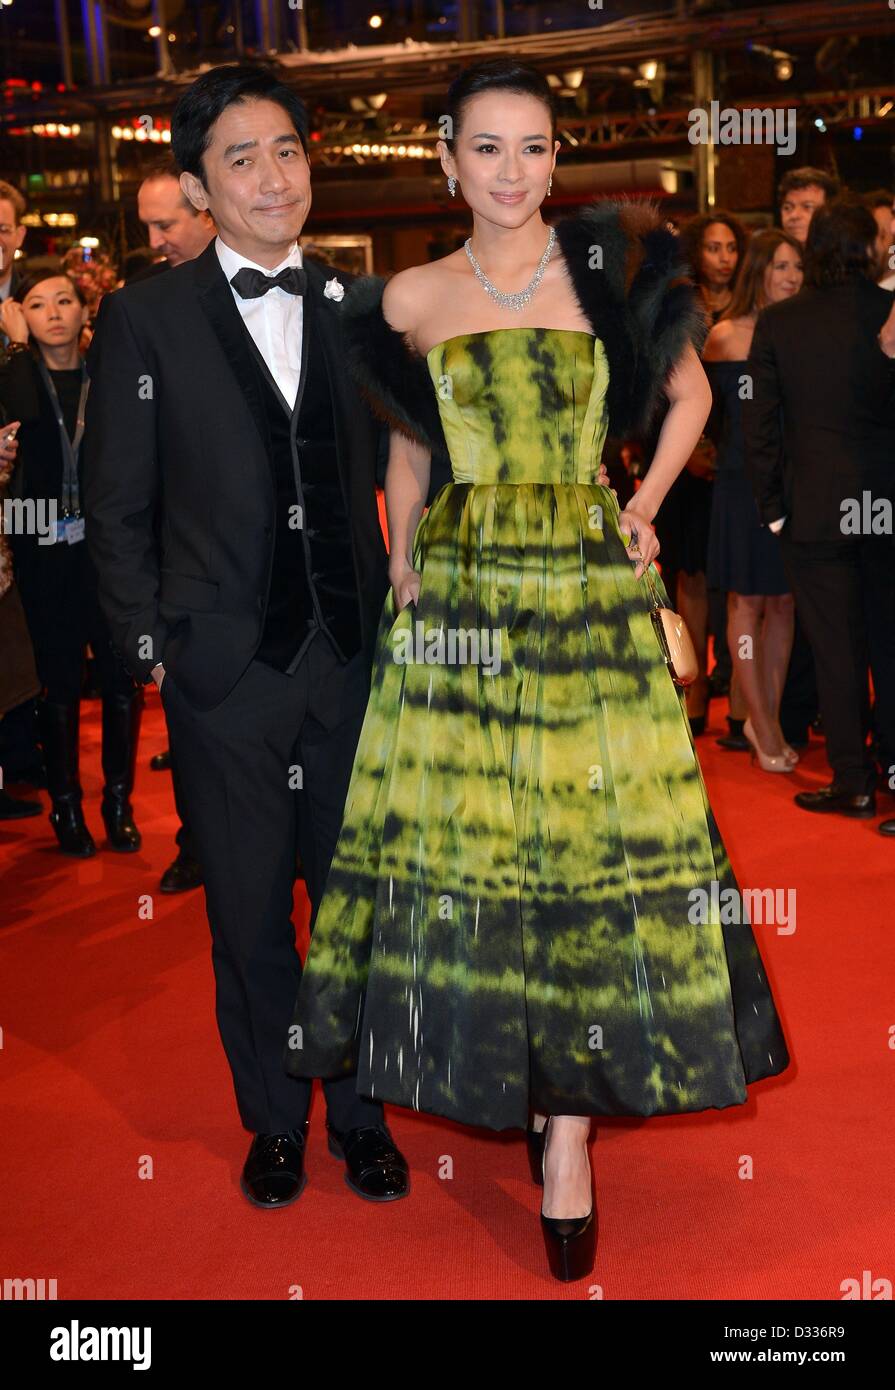 Chinese actors Zhang Ziyi (R) and Tony Leung Chiu Wai arrive for the premiere of the movie 'The Grandmaster' ('Yi dai zong shi') during the 63rd annual Berlin International Film Festival, in Berlin, Germany, 07 February 2013. The movie has been selected as the opening film for the Berlinale and is running in the offical section out of competition. Photo: Britta Pedersen/dpa Stock Photo